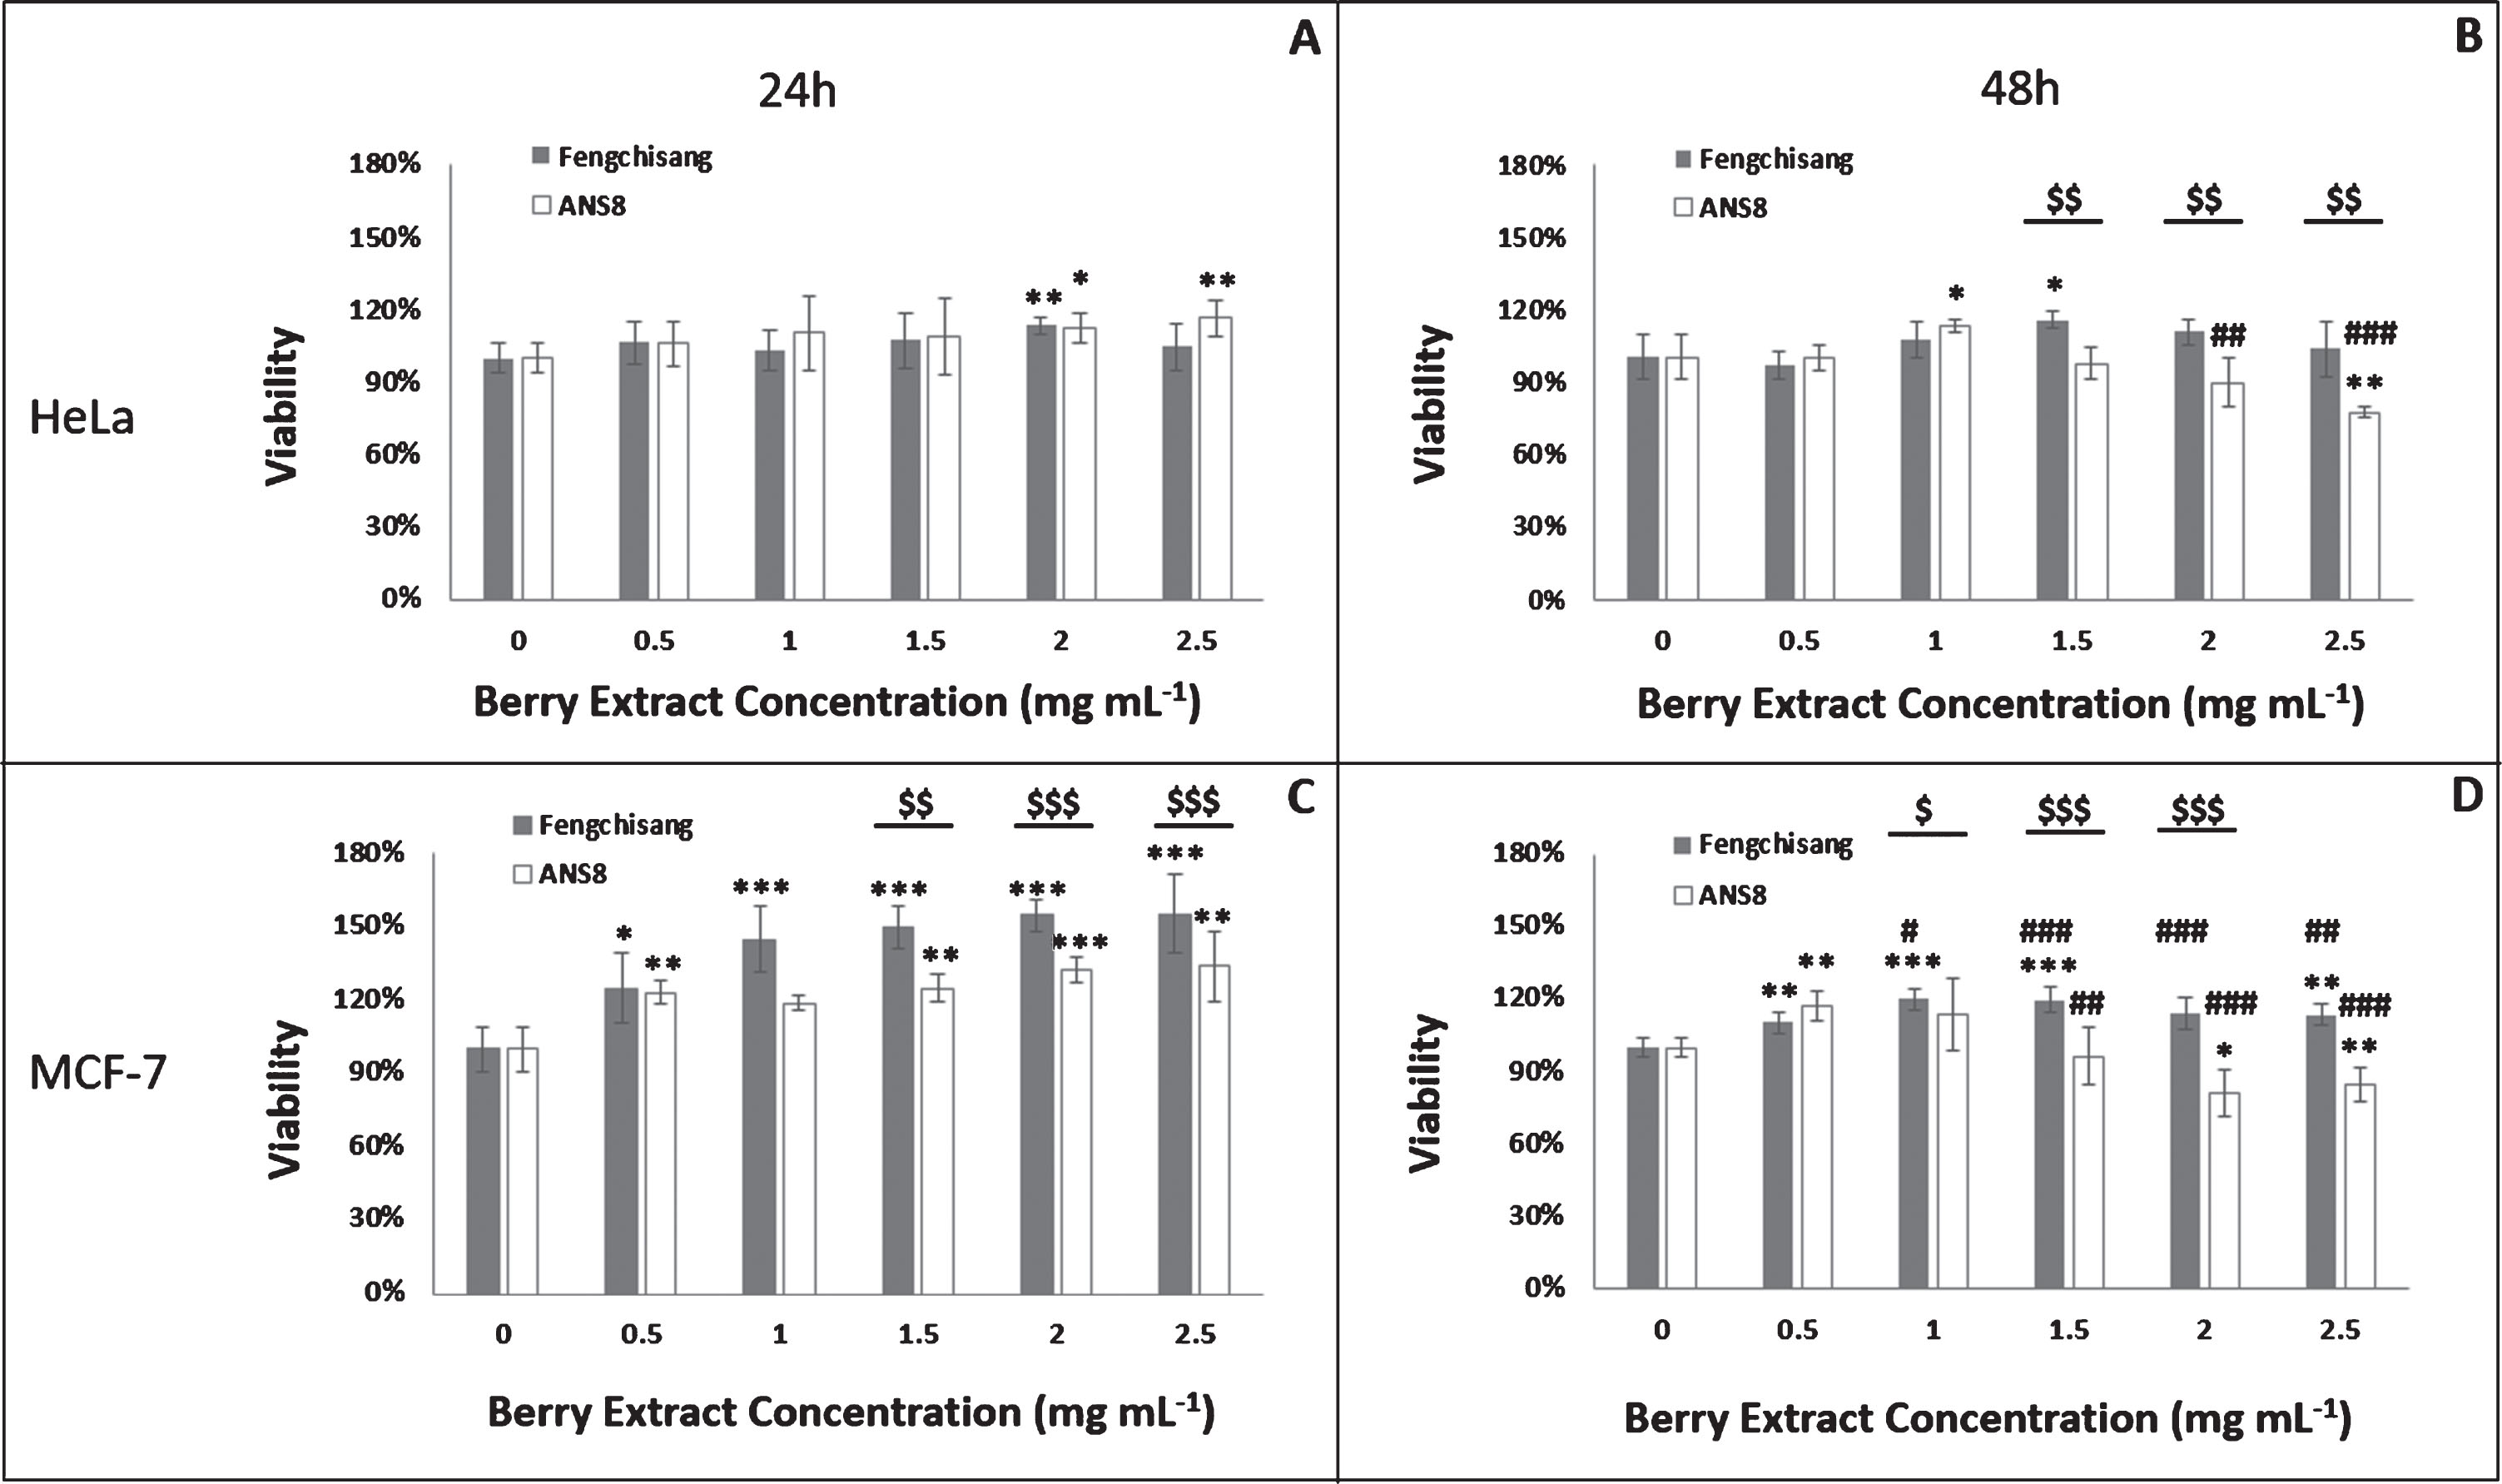 Viability of HeLa (A, B) and MCF-7 (C, D) cells after 24 (A, C) and 48 h (B, D) incubation with different concentrations of Fengchisang and ANS8 ethanolic extracts in comparison with the control (% viability) (n = 5). Abbreviations: asterisks indicate significant differences from the control (*p < 0.05, **p < 0.01,***p < 0.001). Hashtags indicate significant differences from the respective treatment at 24 h (#p < 0.05, # #p < 0.01, # #<0.001). Dollar signs indicate significant differences between genotypes for the same extract concentration ($ <0.05, $$ <0.01, $$$ <0.001). Statistically significant differences were determined using the Student’s T-test at probability level p < 0.05.